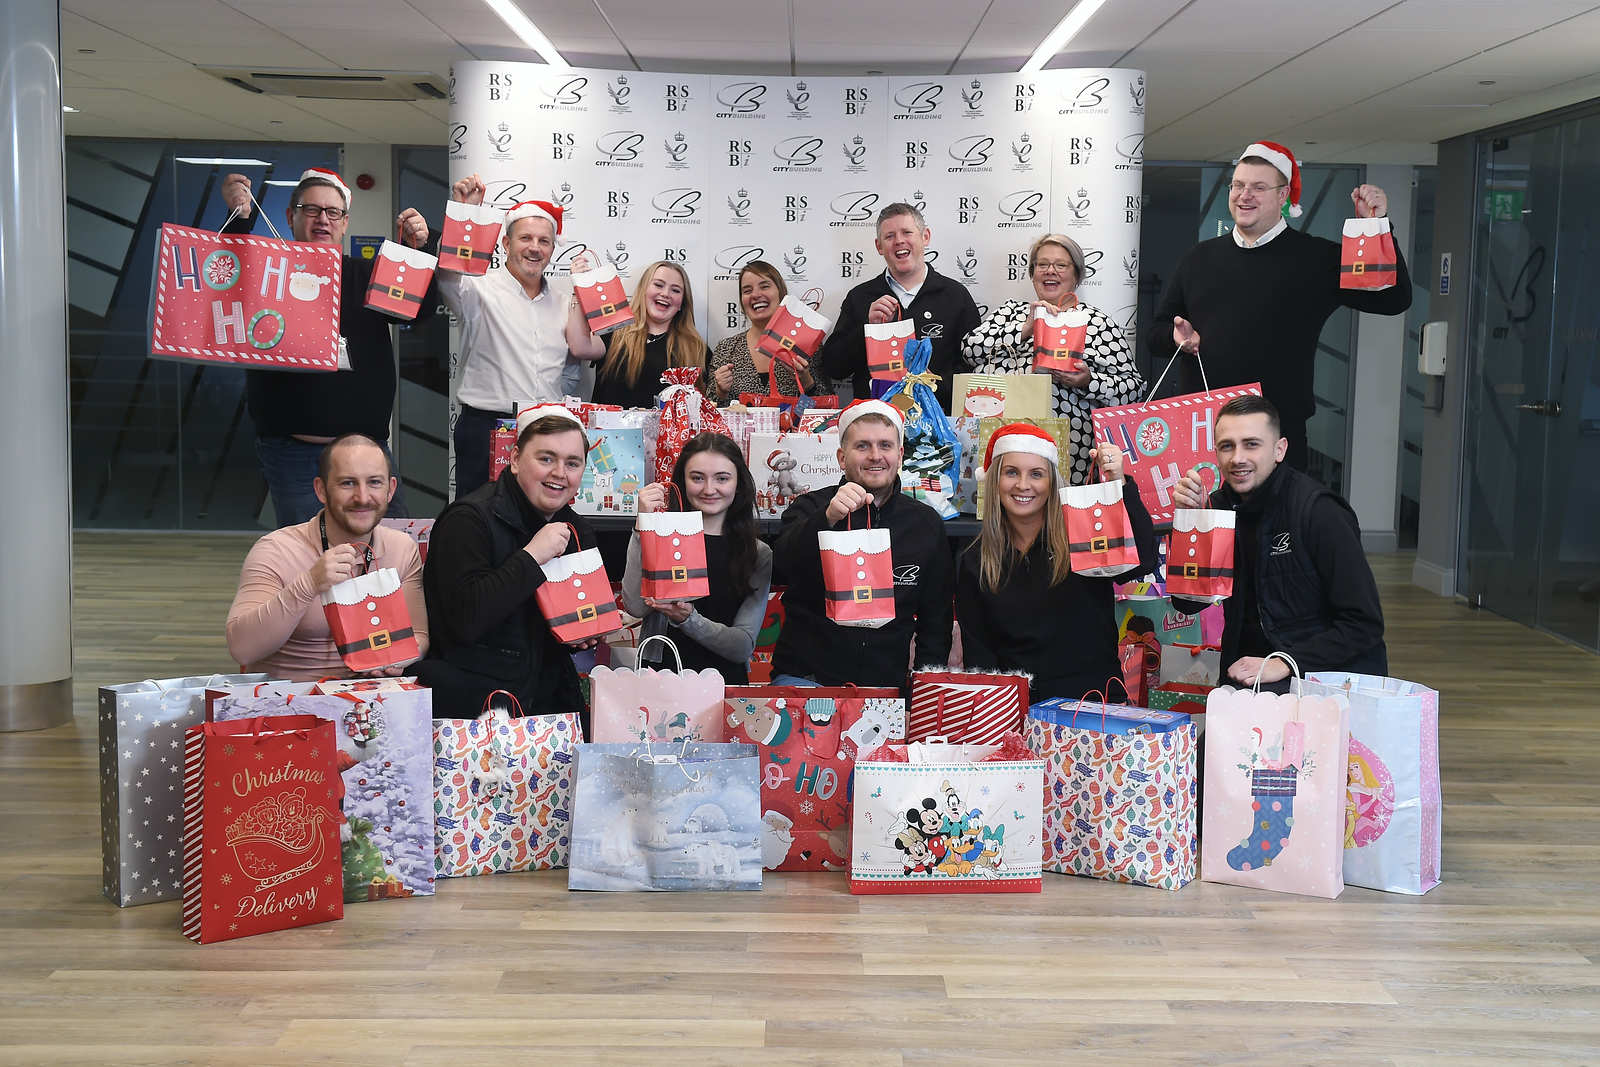 City Building gives back with bumper gift drive this Christmas